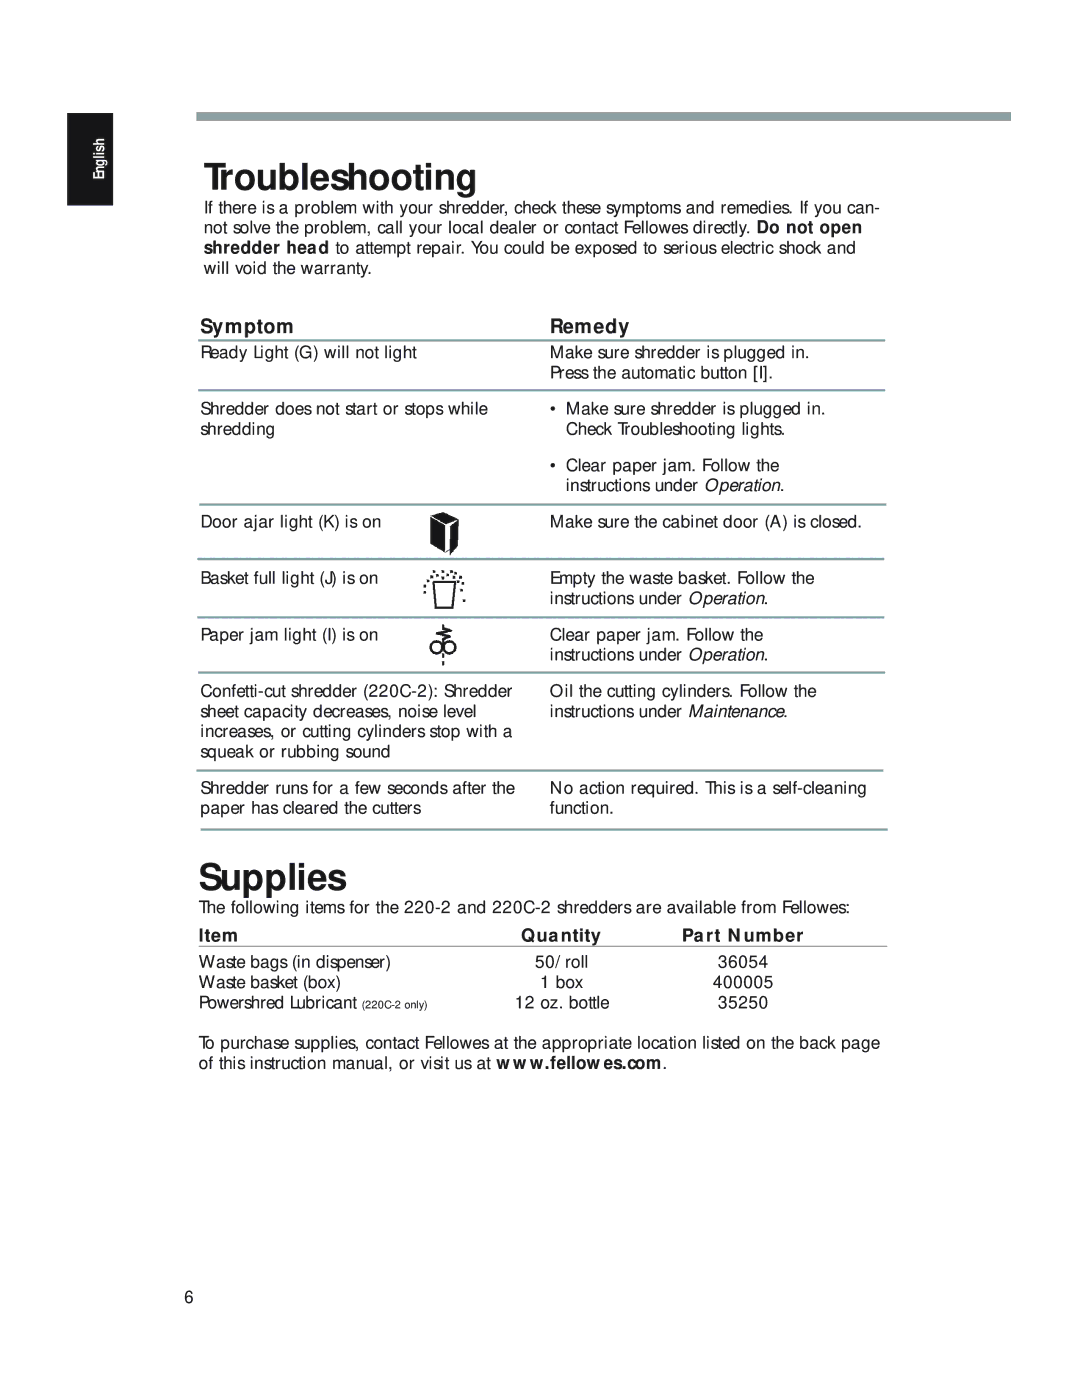 Fellowes 220C-2, 220-2 manual Troubleshooting, Supplies, Symptom Remedy, Quantity Part Number 